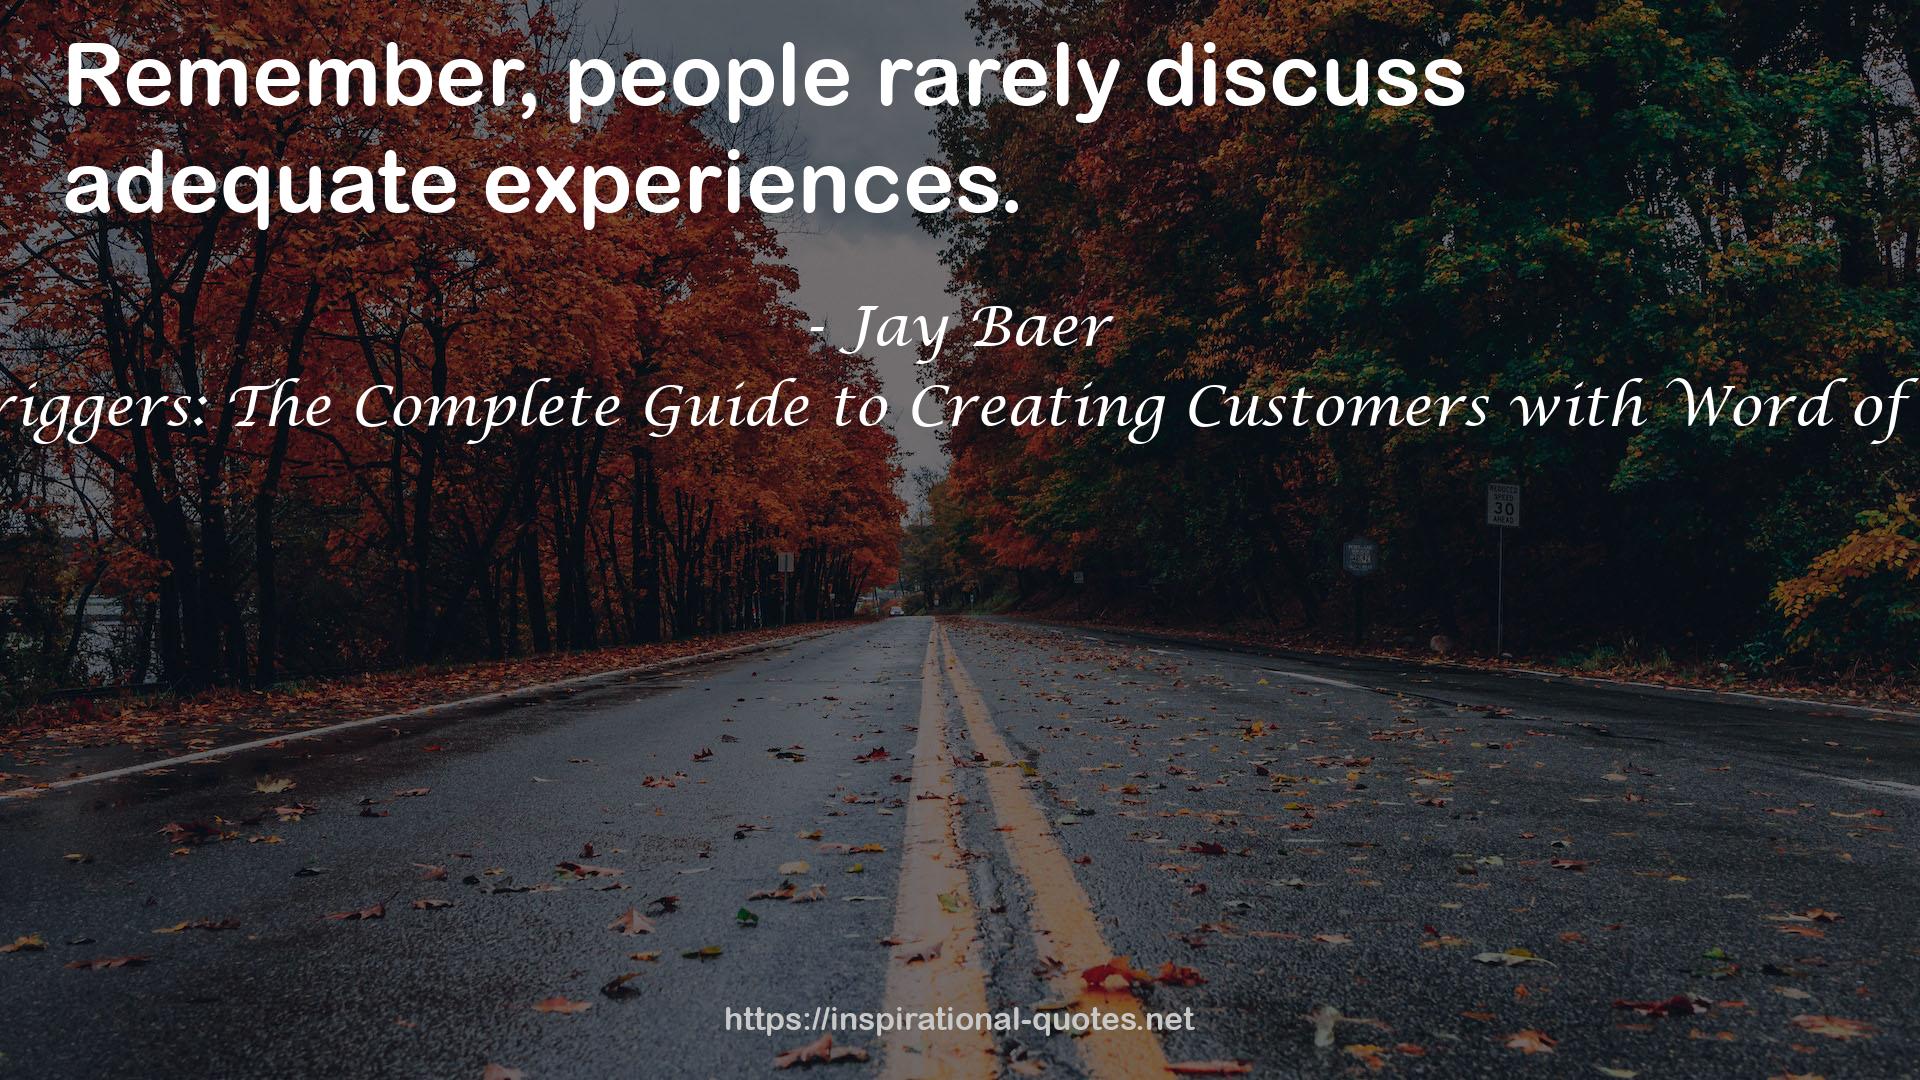 Talk Triggers: The Complete Guide to Creating Customers with Word of Mouth QUOTES